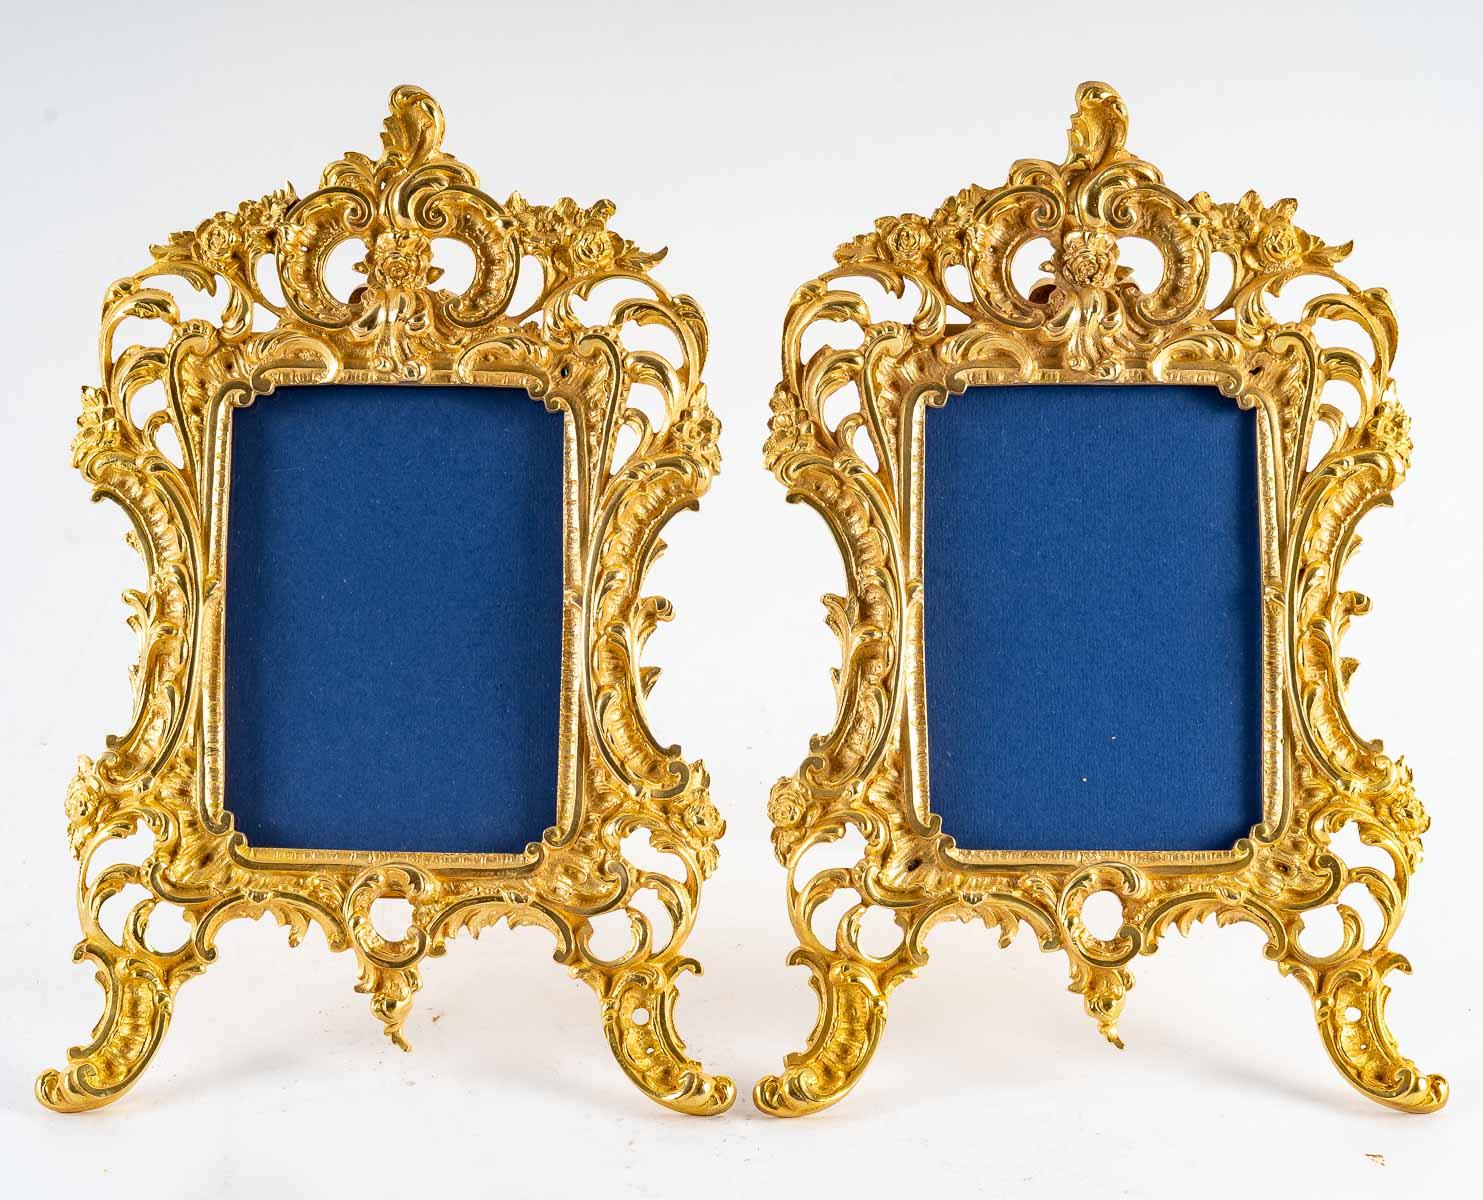 Gilt A pair of gilt bronze picture frames, 19th century